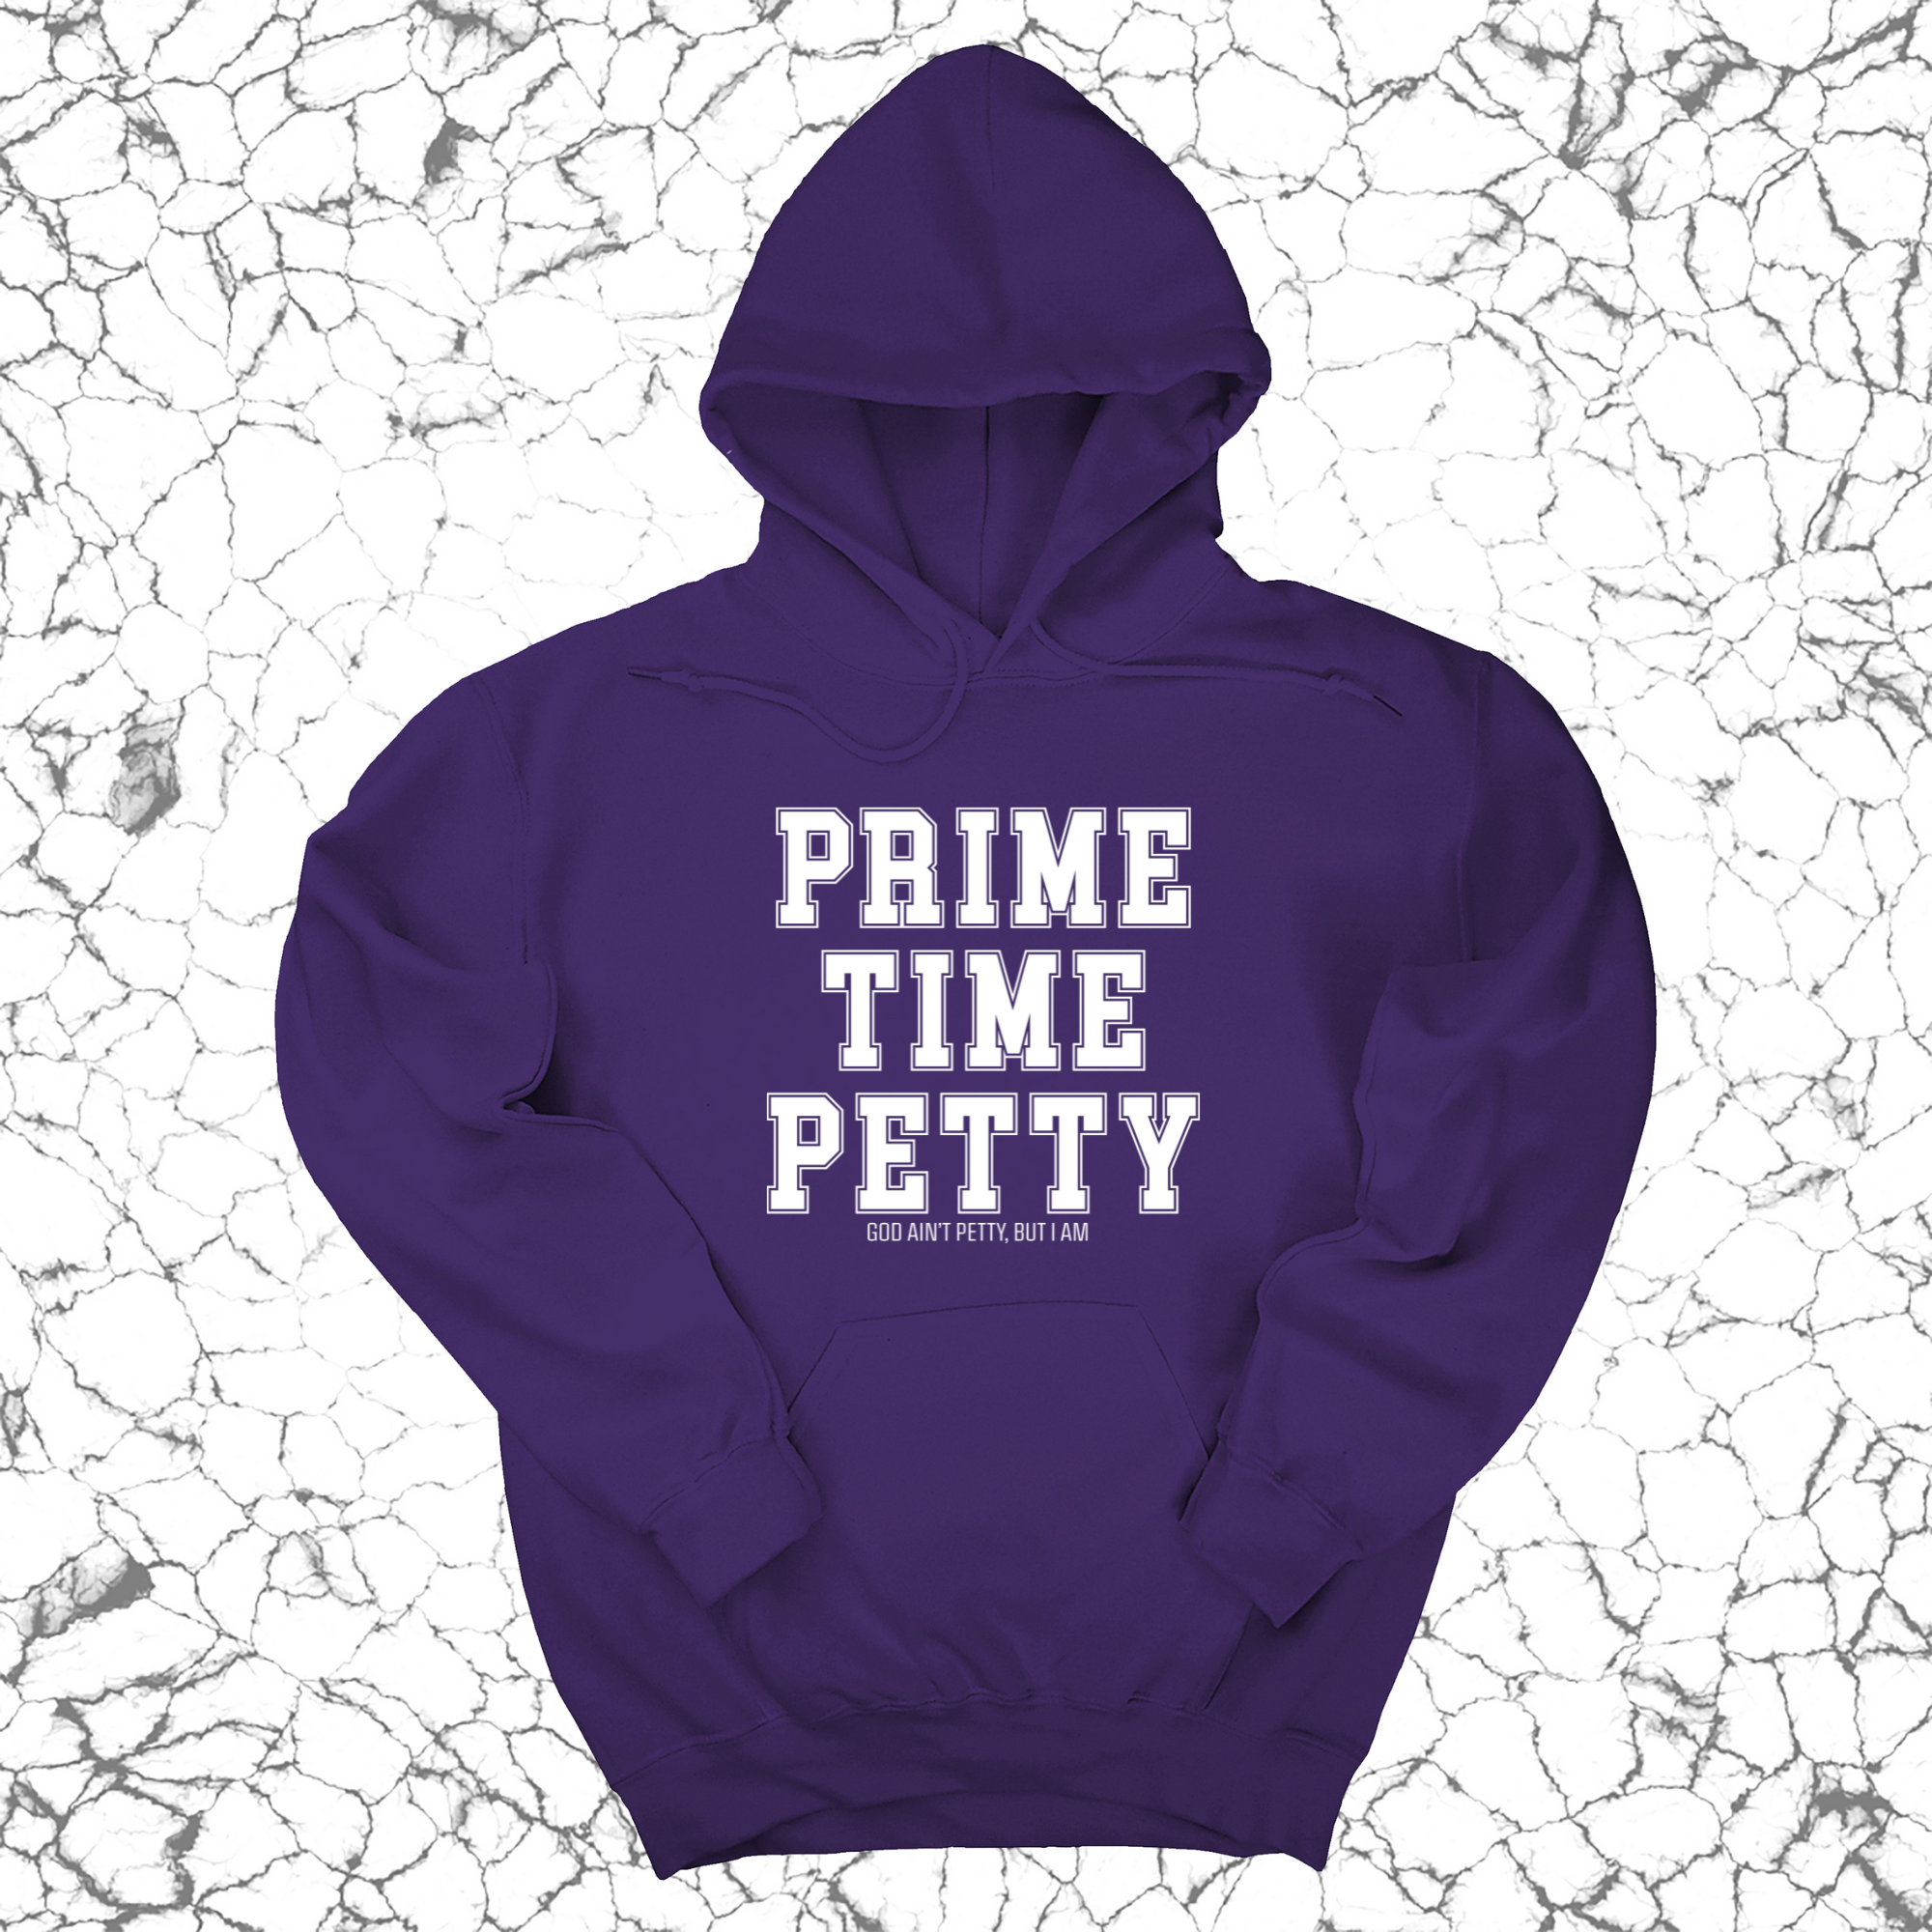 Prime Time Petty Varsity Unisex Hoodie-Hoodie-The Original God Ain't Petty But I Am